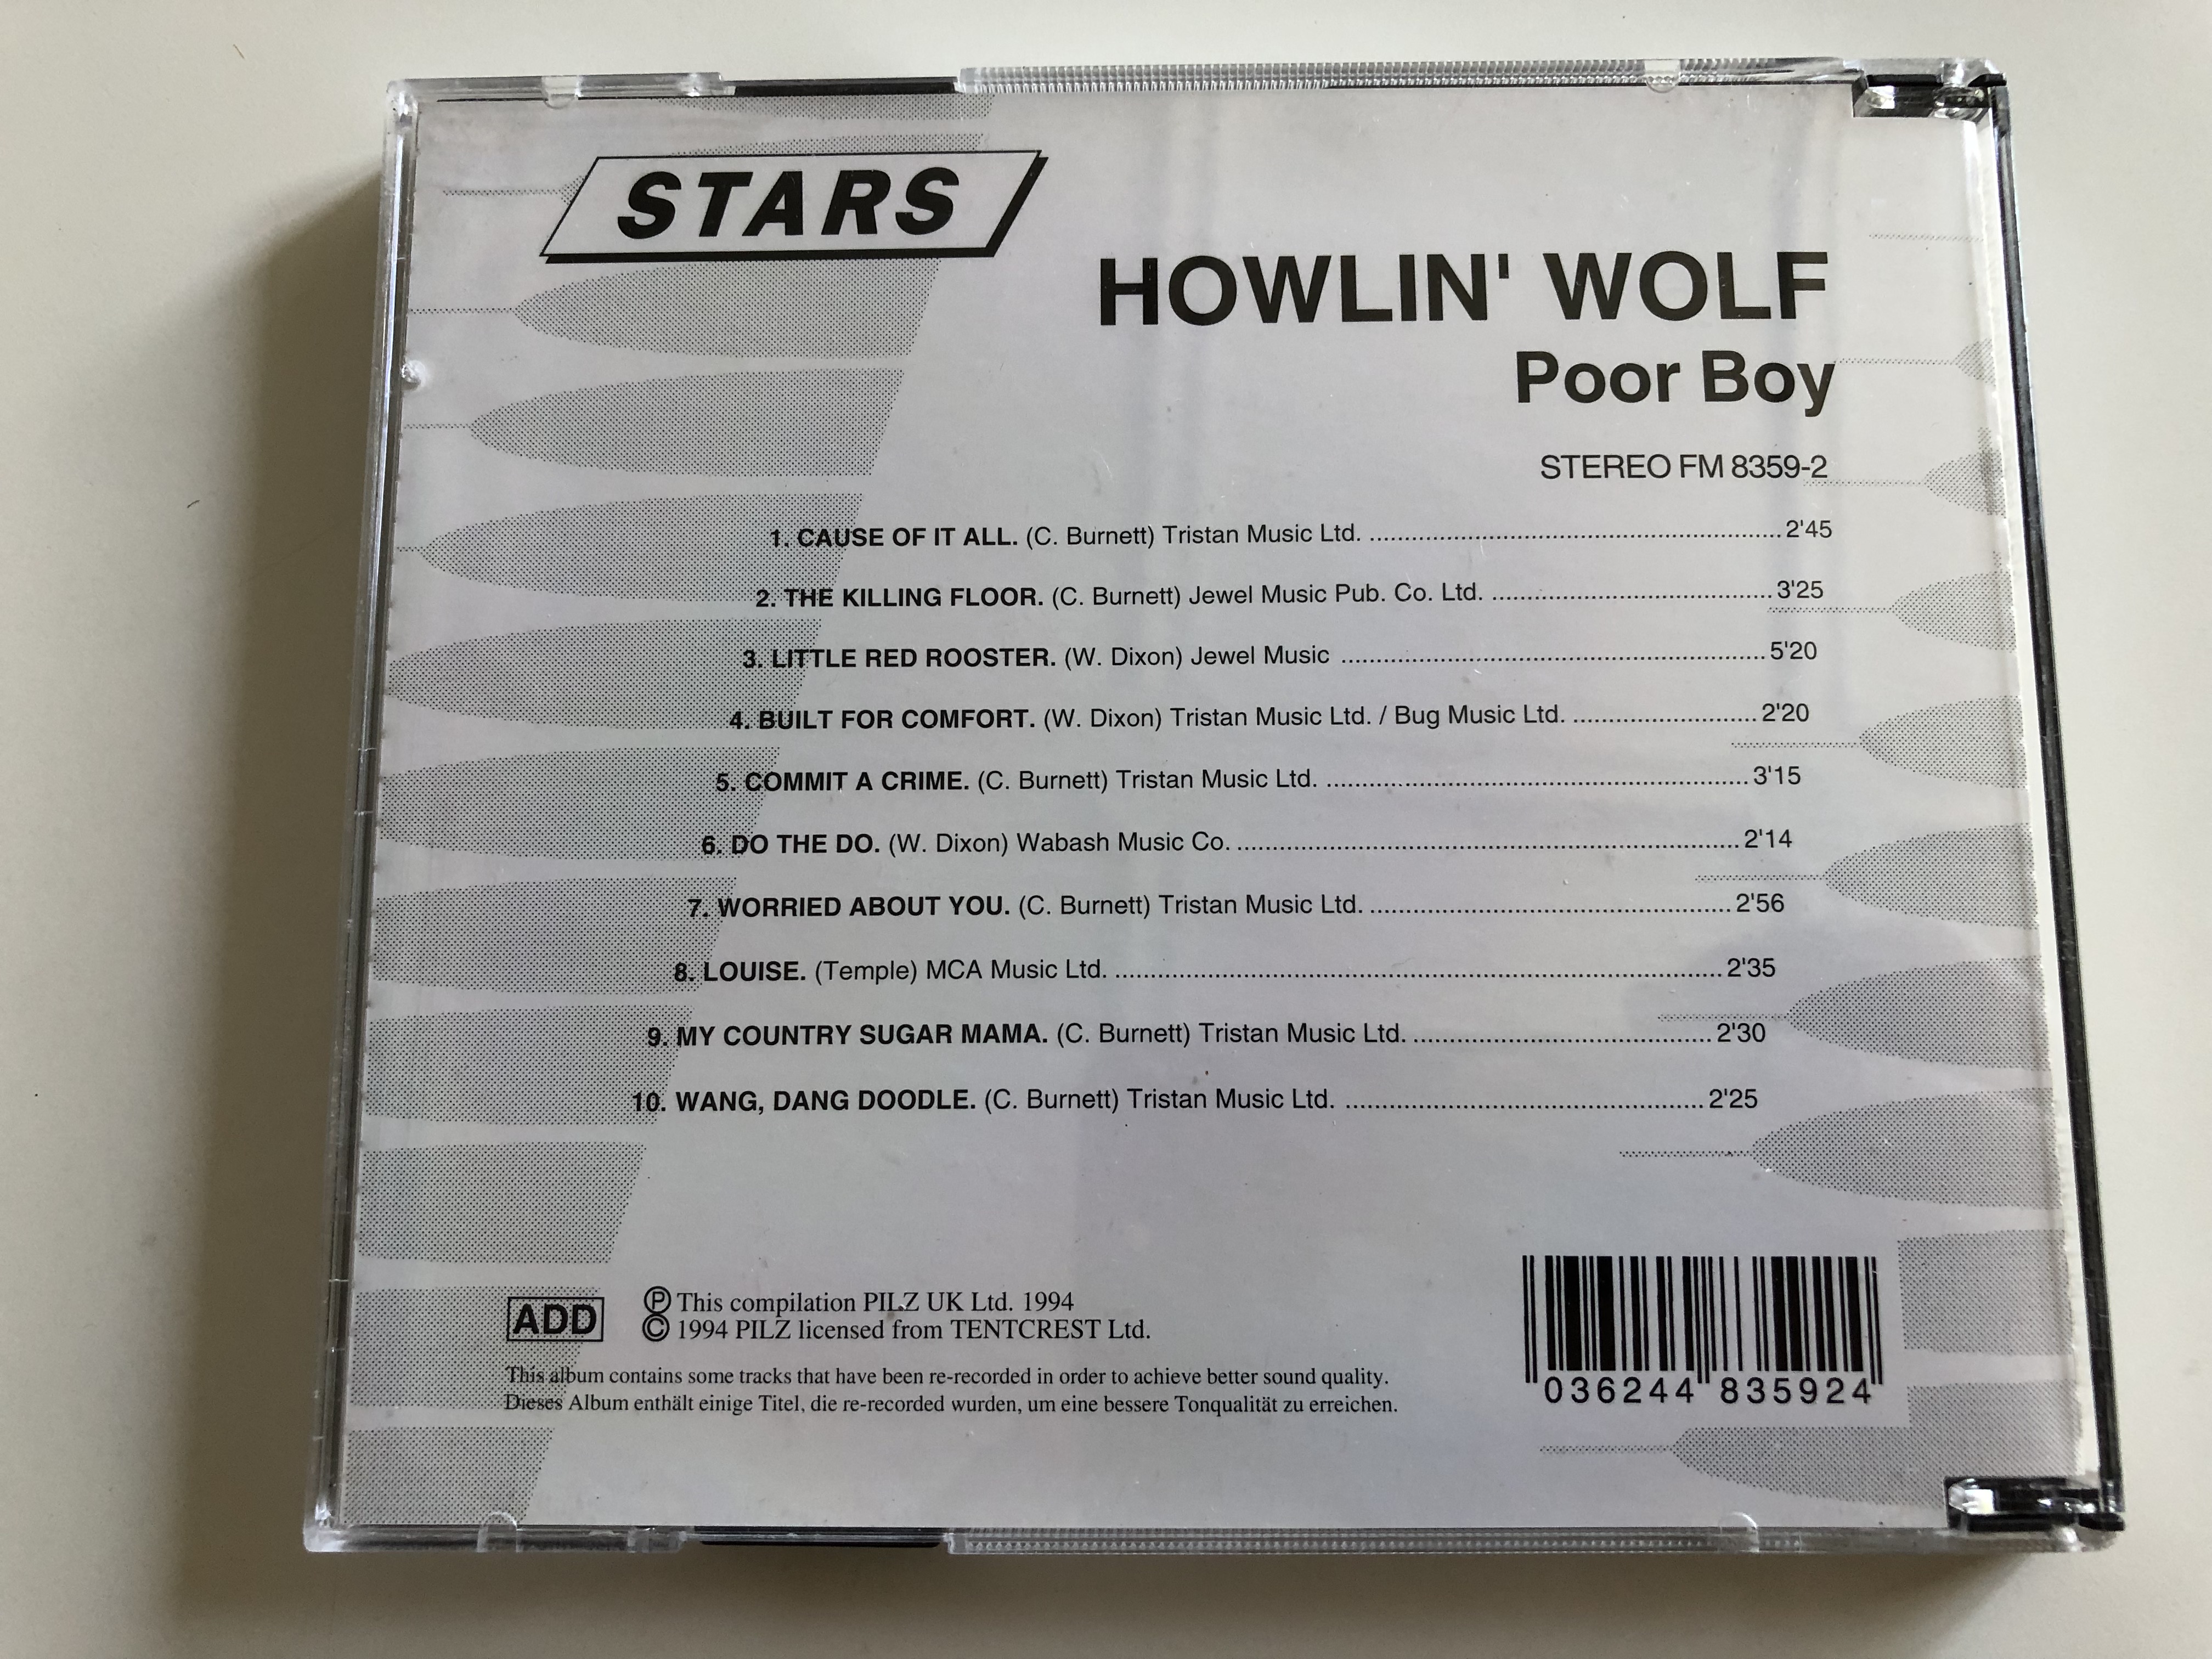 howlin-wolf-poor-boy-cause-of-it-all-worried-about-my-baby-commit-a-crime-do-the-do-and-other-audio-cd-1994-pilz-cd-stereo-fm-8359-2-3-.jpg